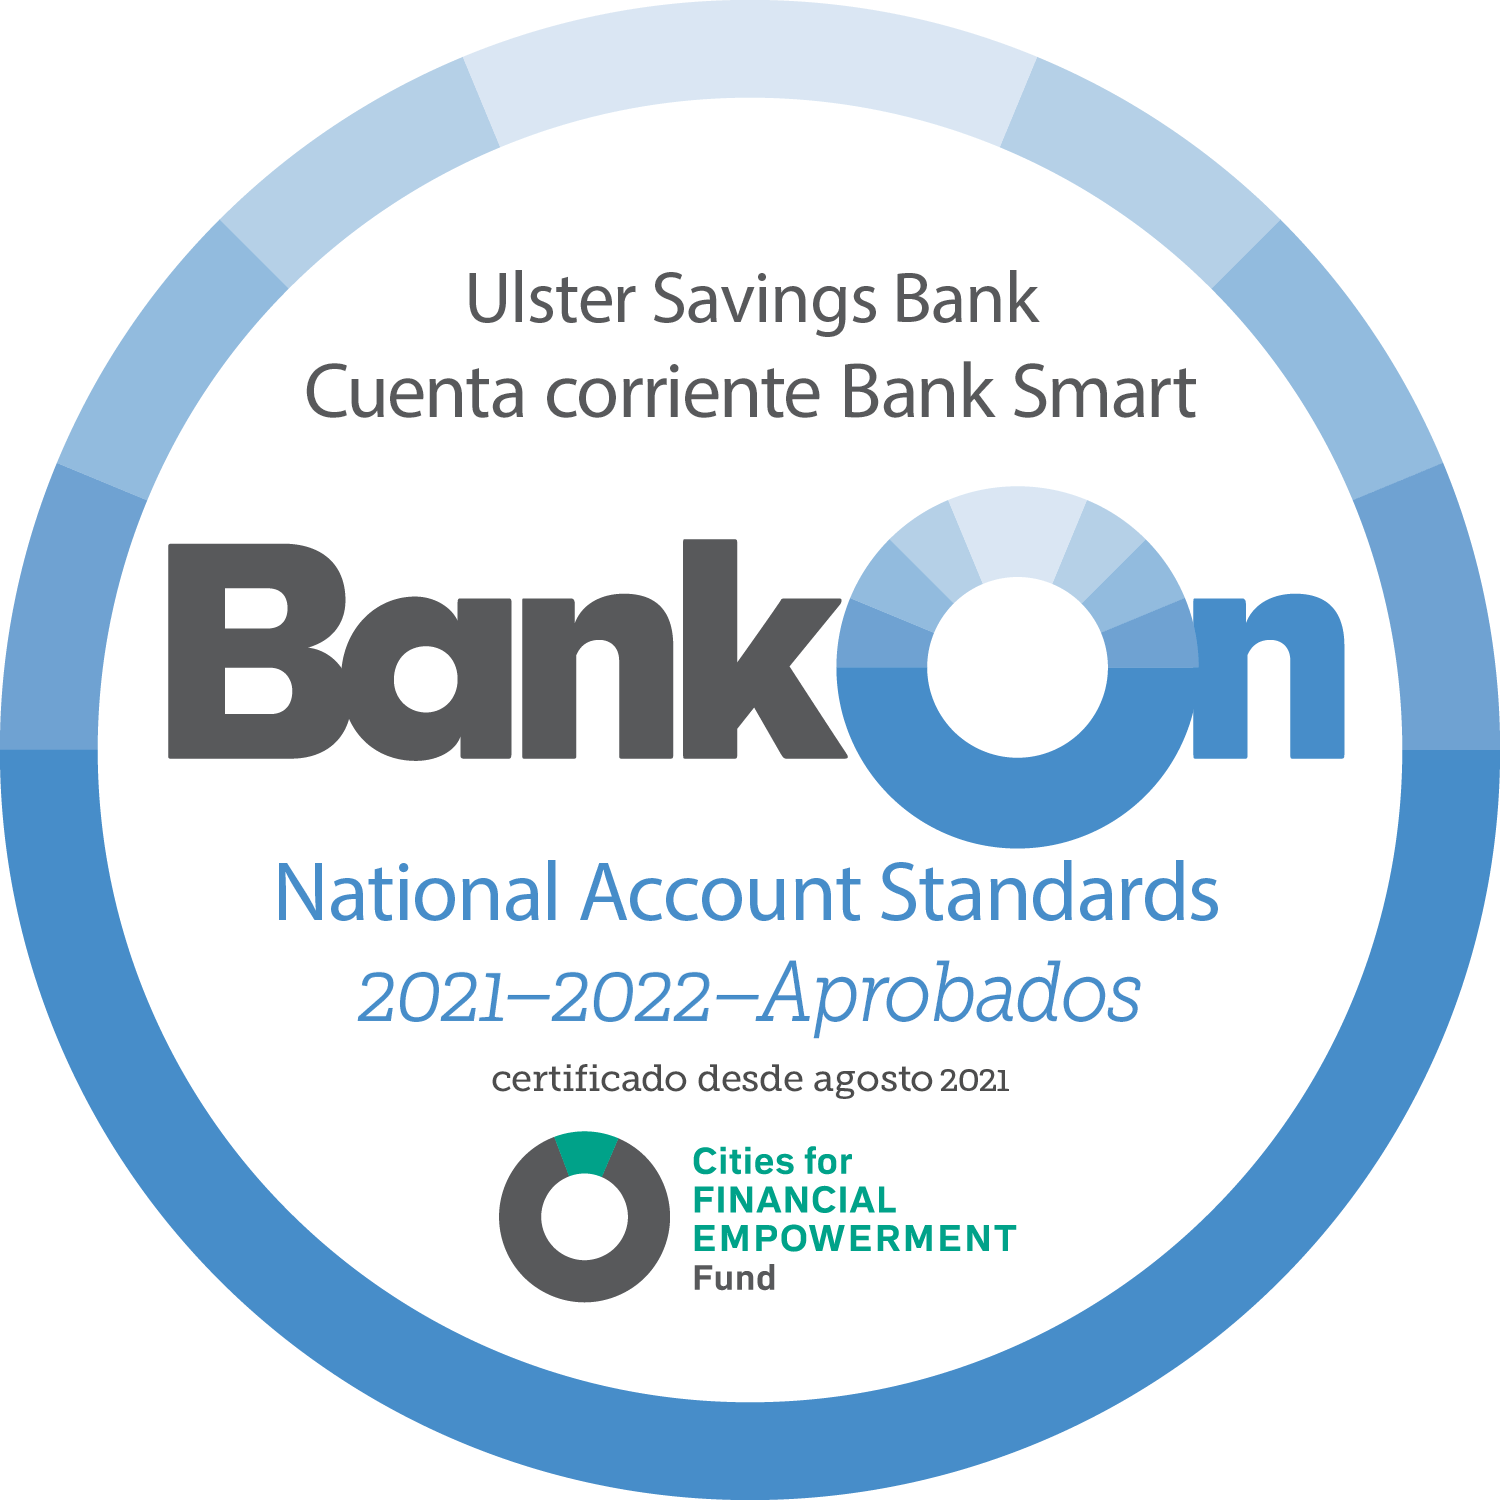 Bank On National Account Standards